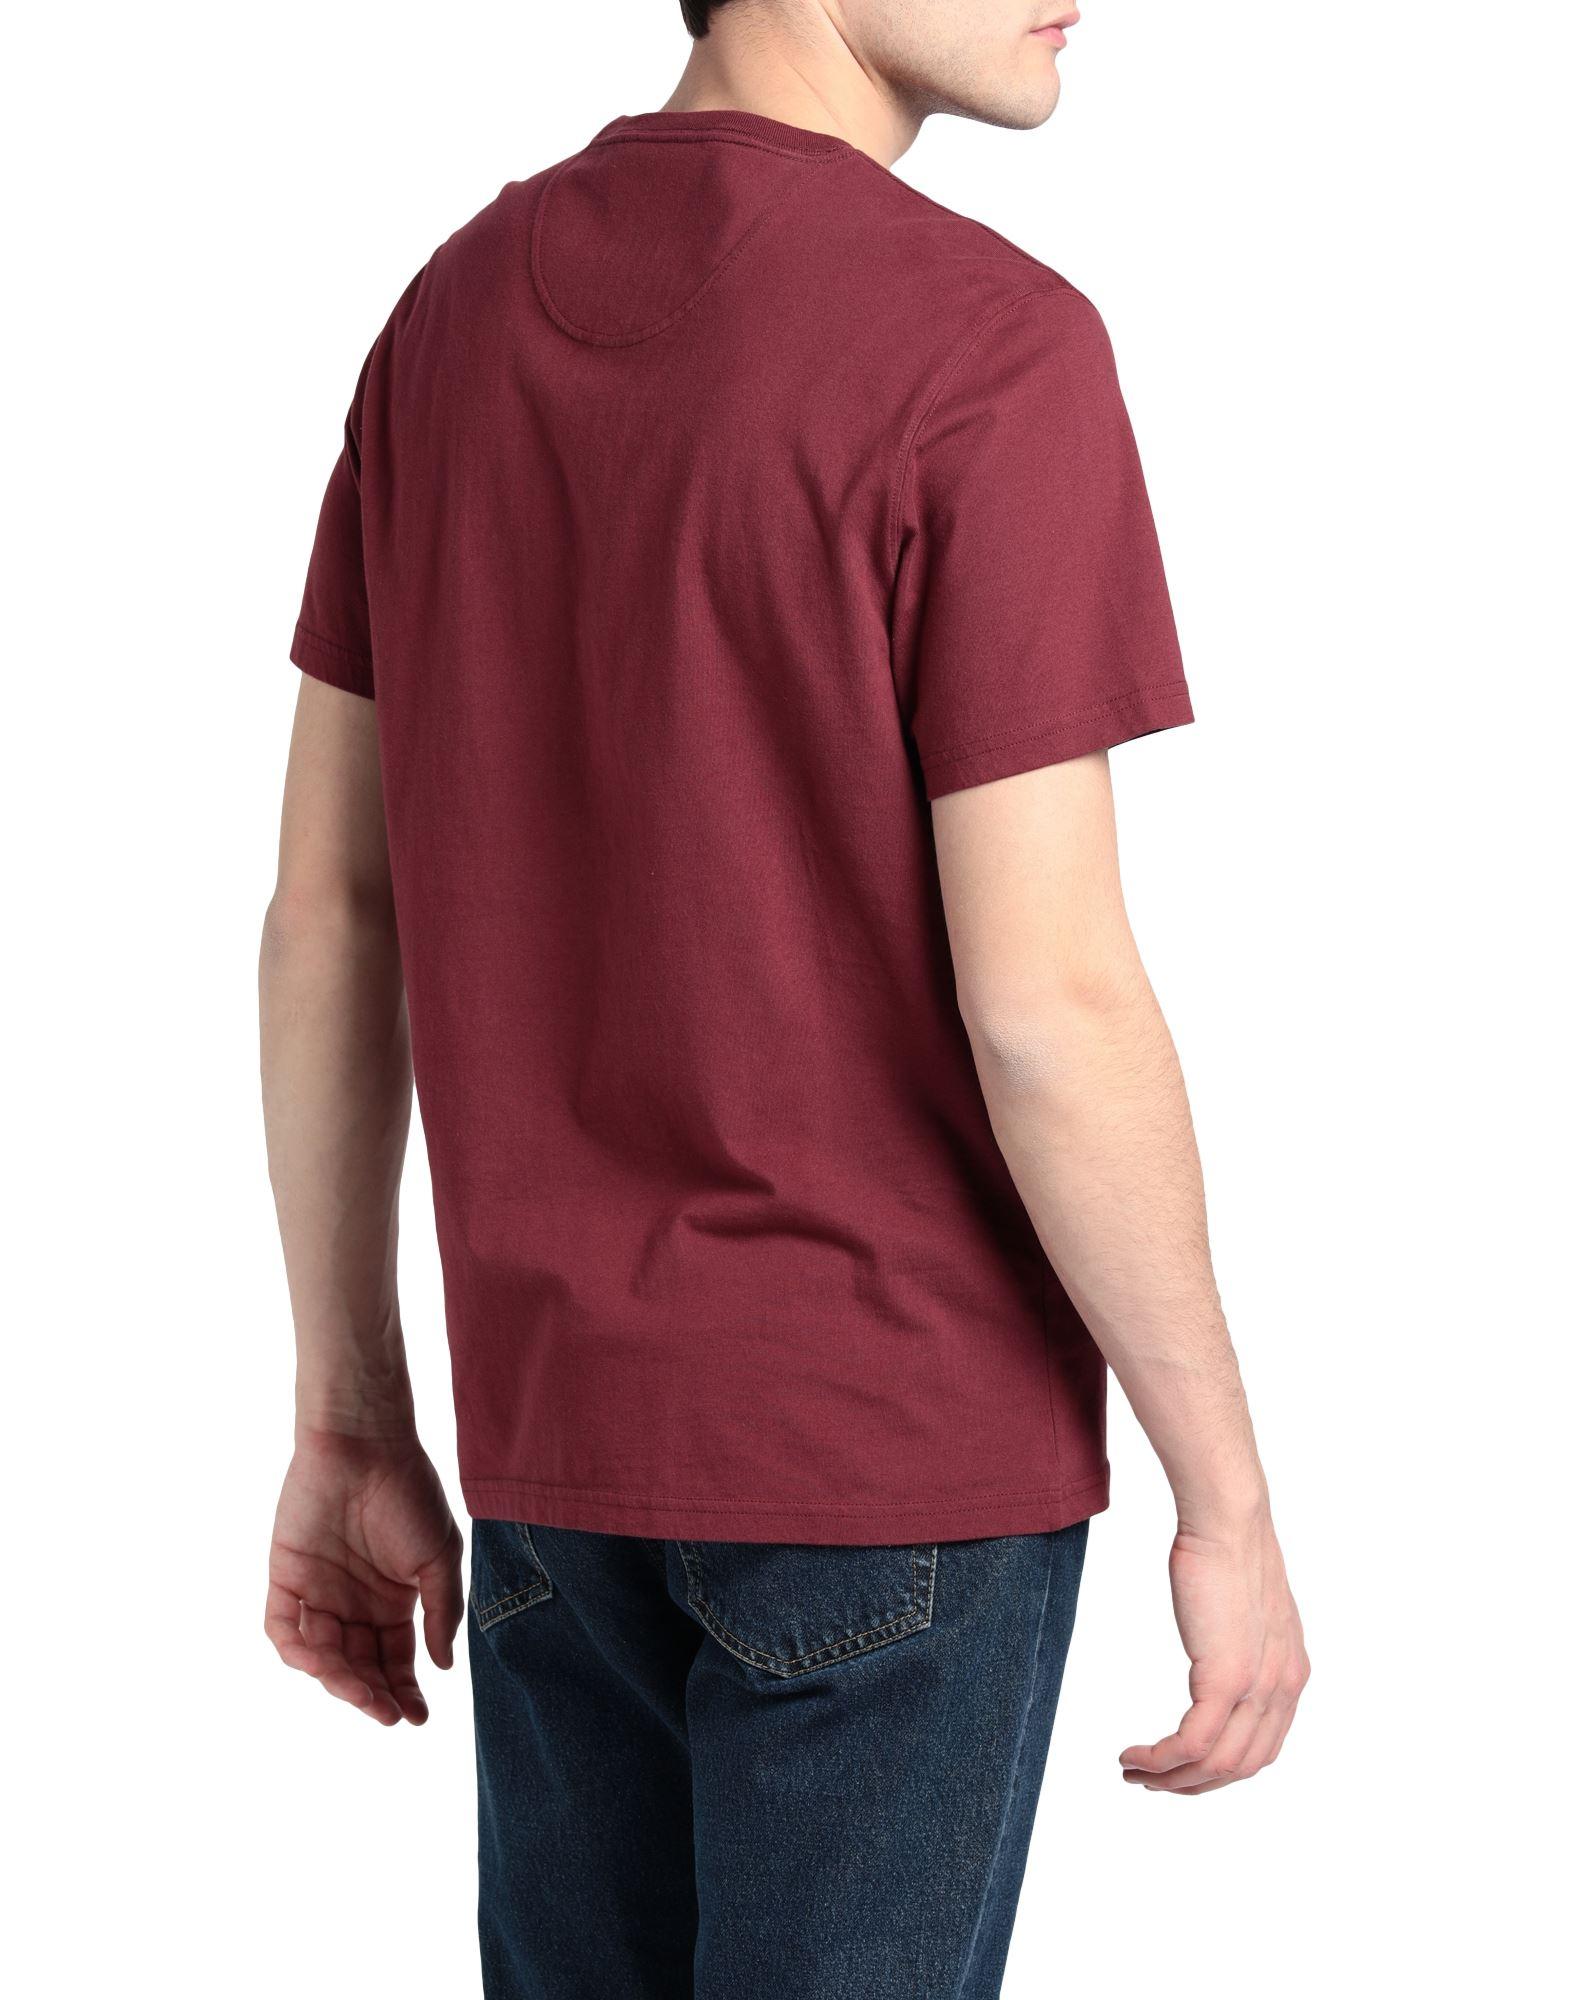 Barbour T-shirt in Red for Men | Lyst